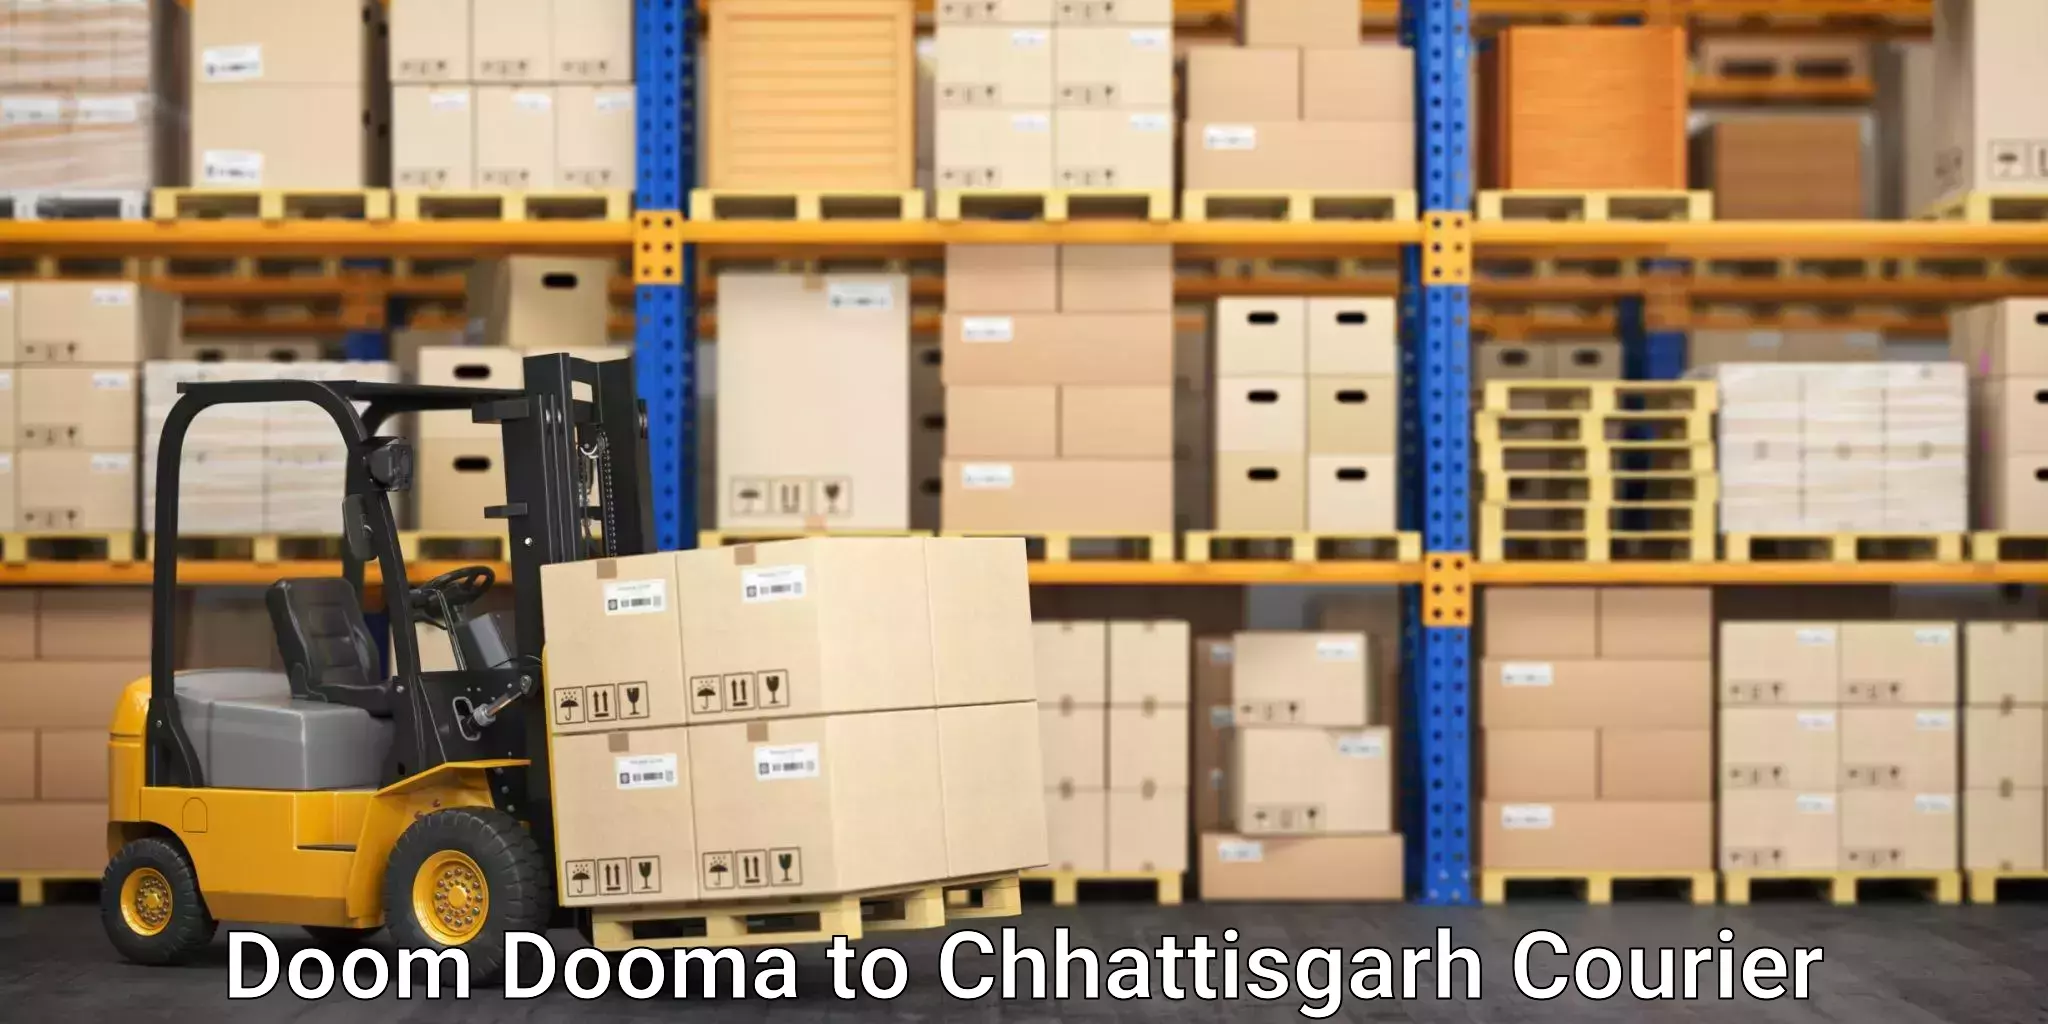 Courier service booking Doom Dooma to Ambikapur